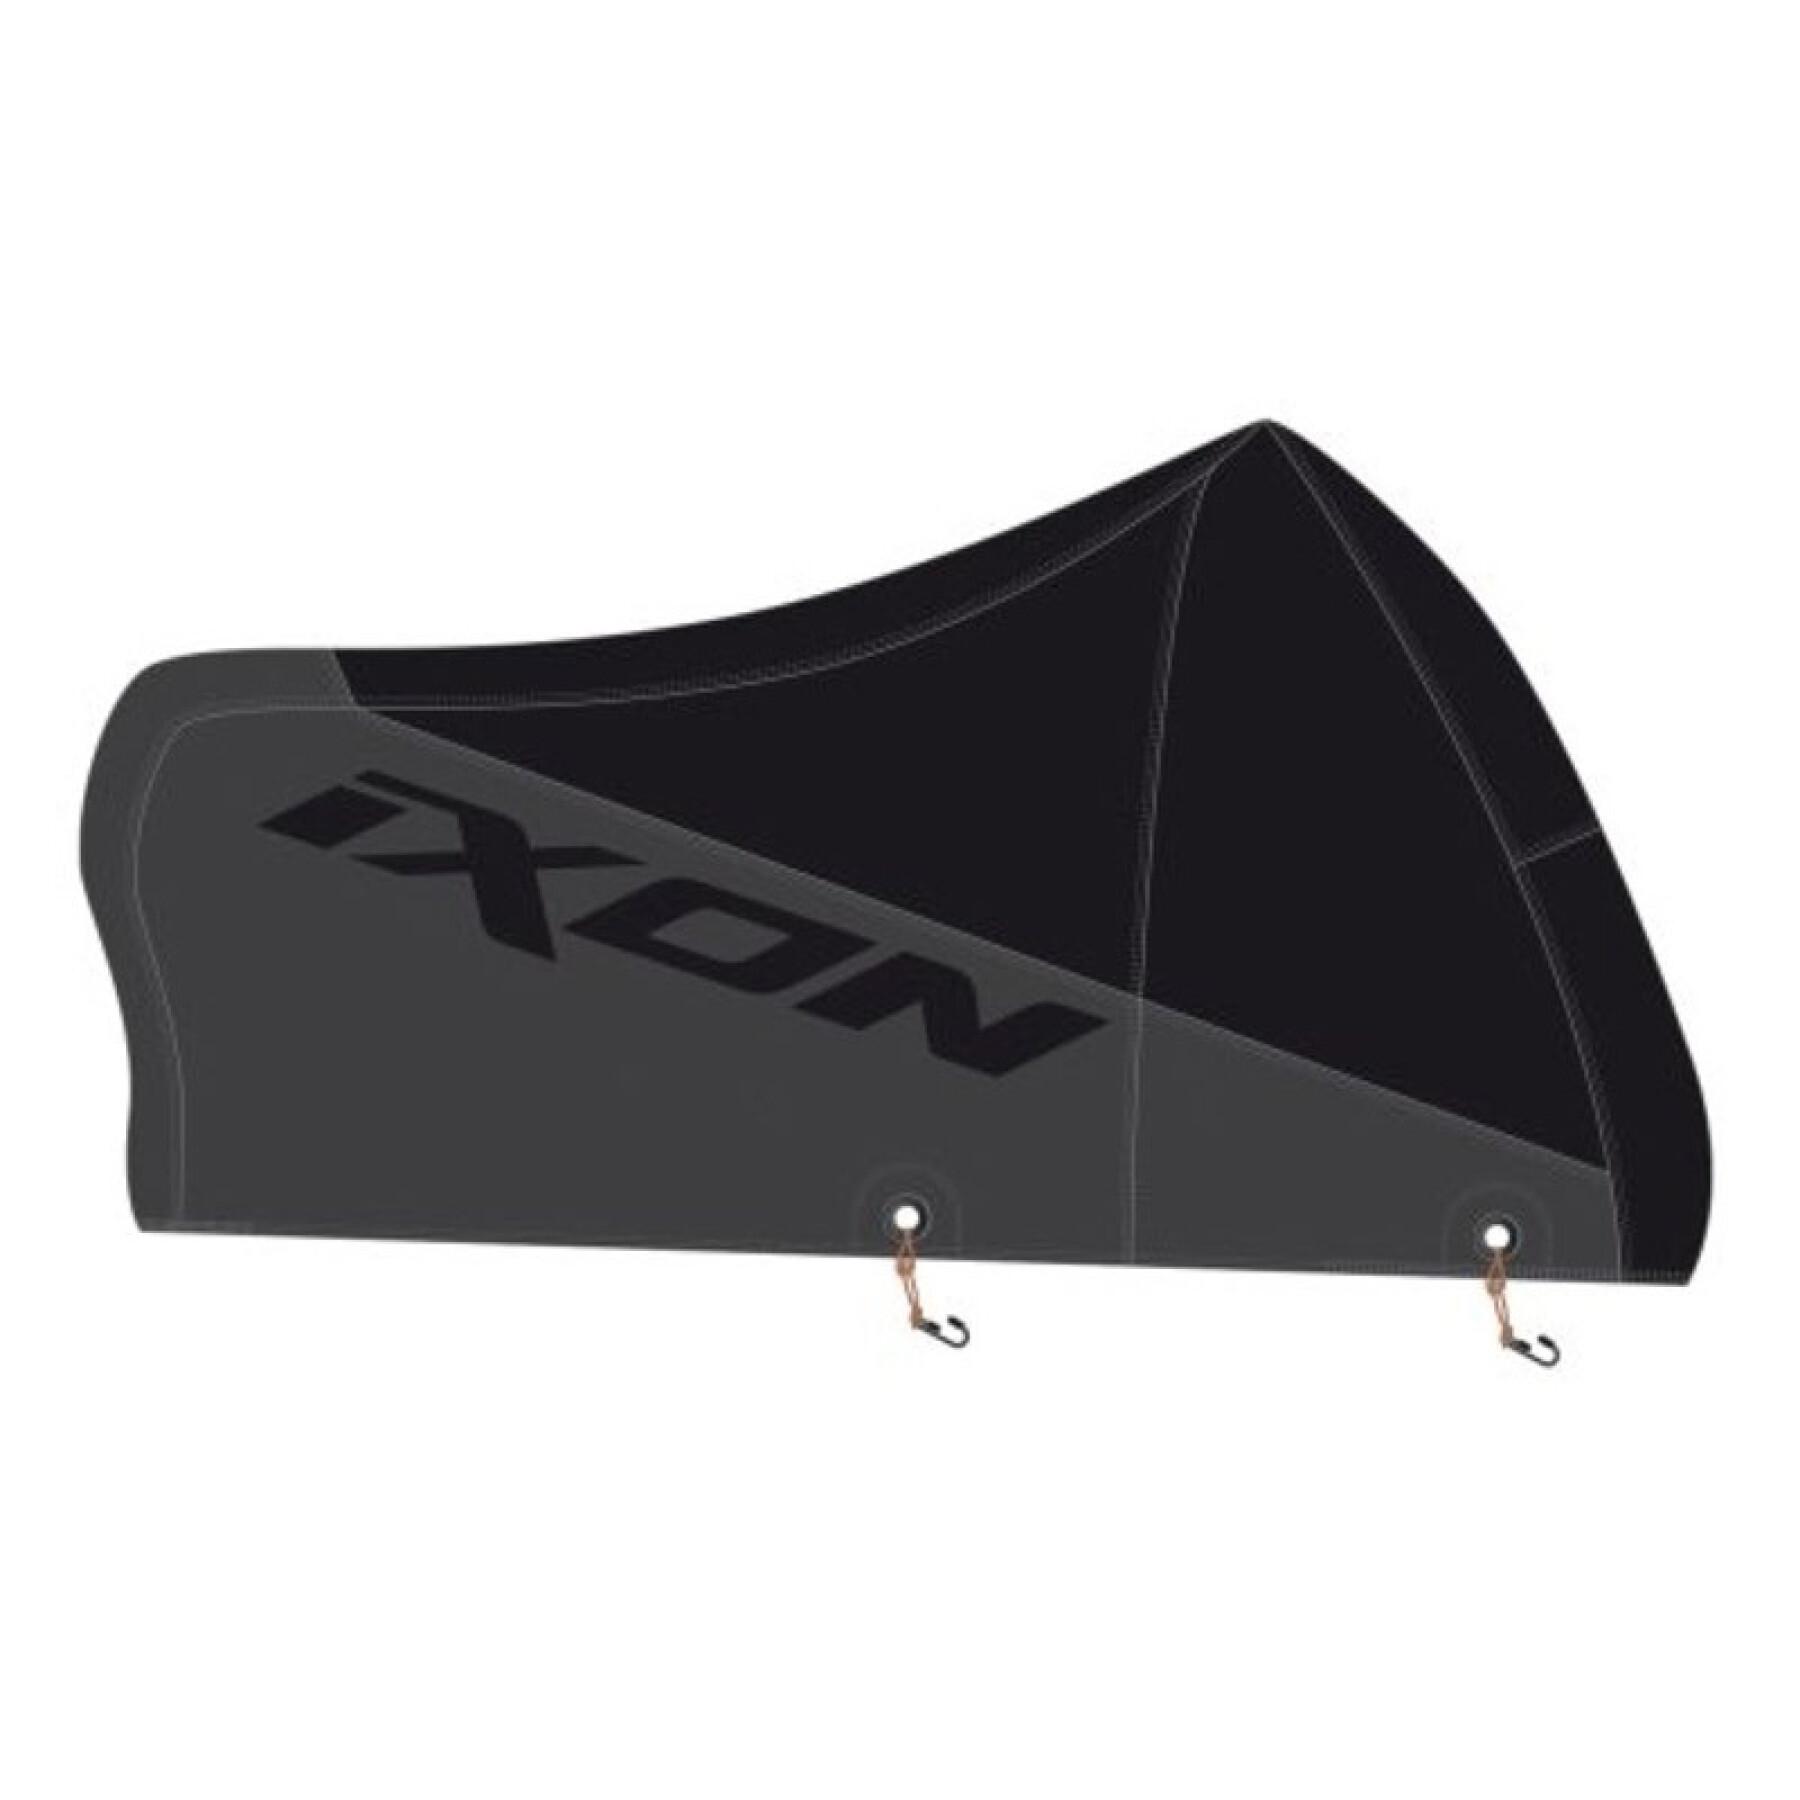 Motorcycle cover for maxi gt Ixon Blanky